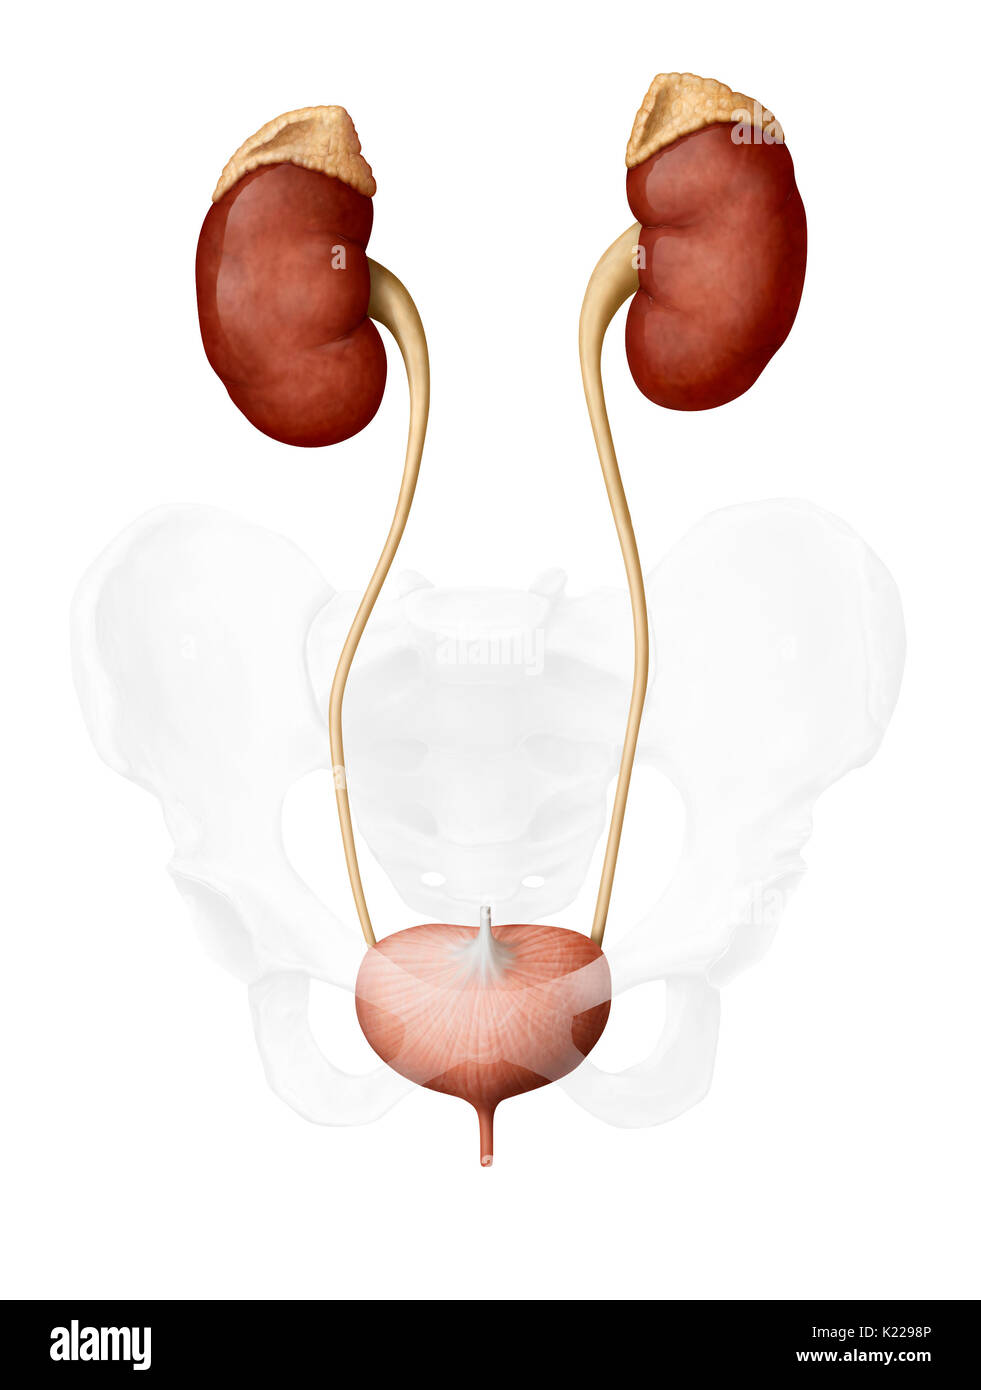 This image shows the urinary system of a woman, which includes the adrenal gland, the kidneys, the ureter, the urinary bladder and the urethra. Stock Photo